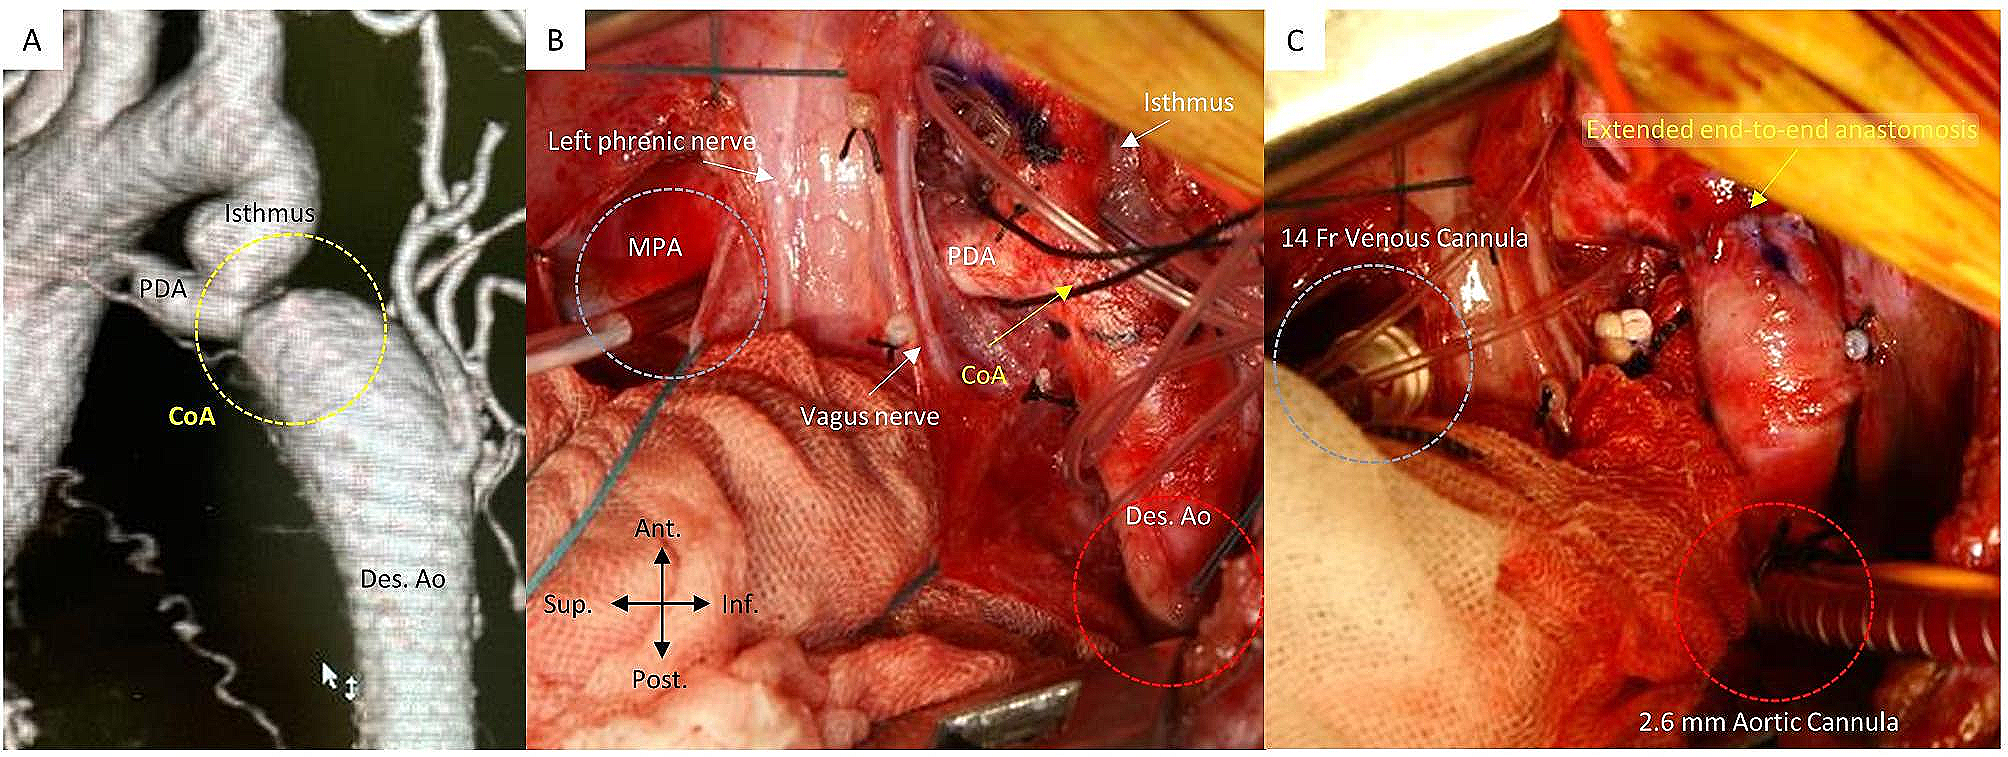 Partial cardiopulmonary bypass through left thoracotomy for coarctation repair in children